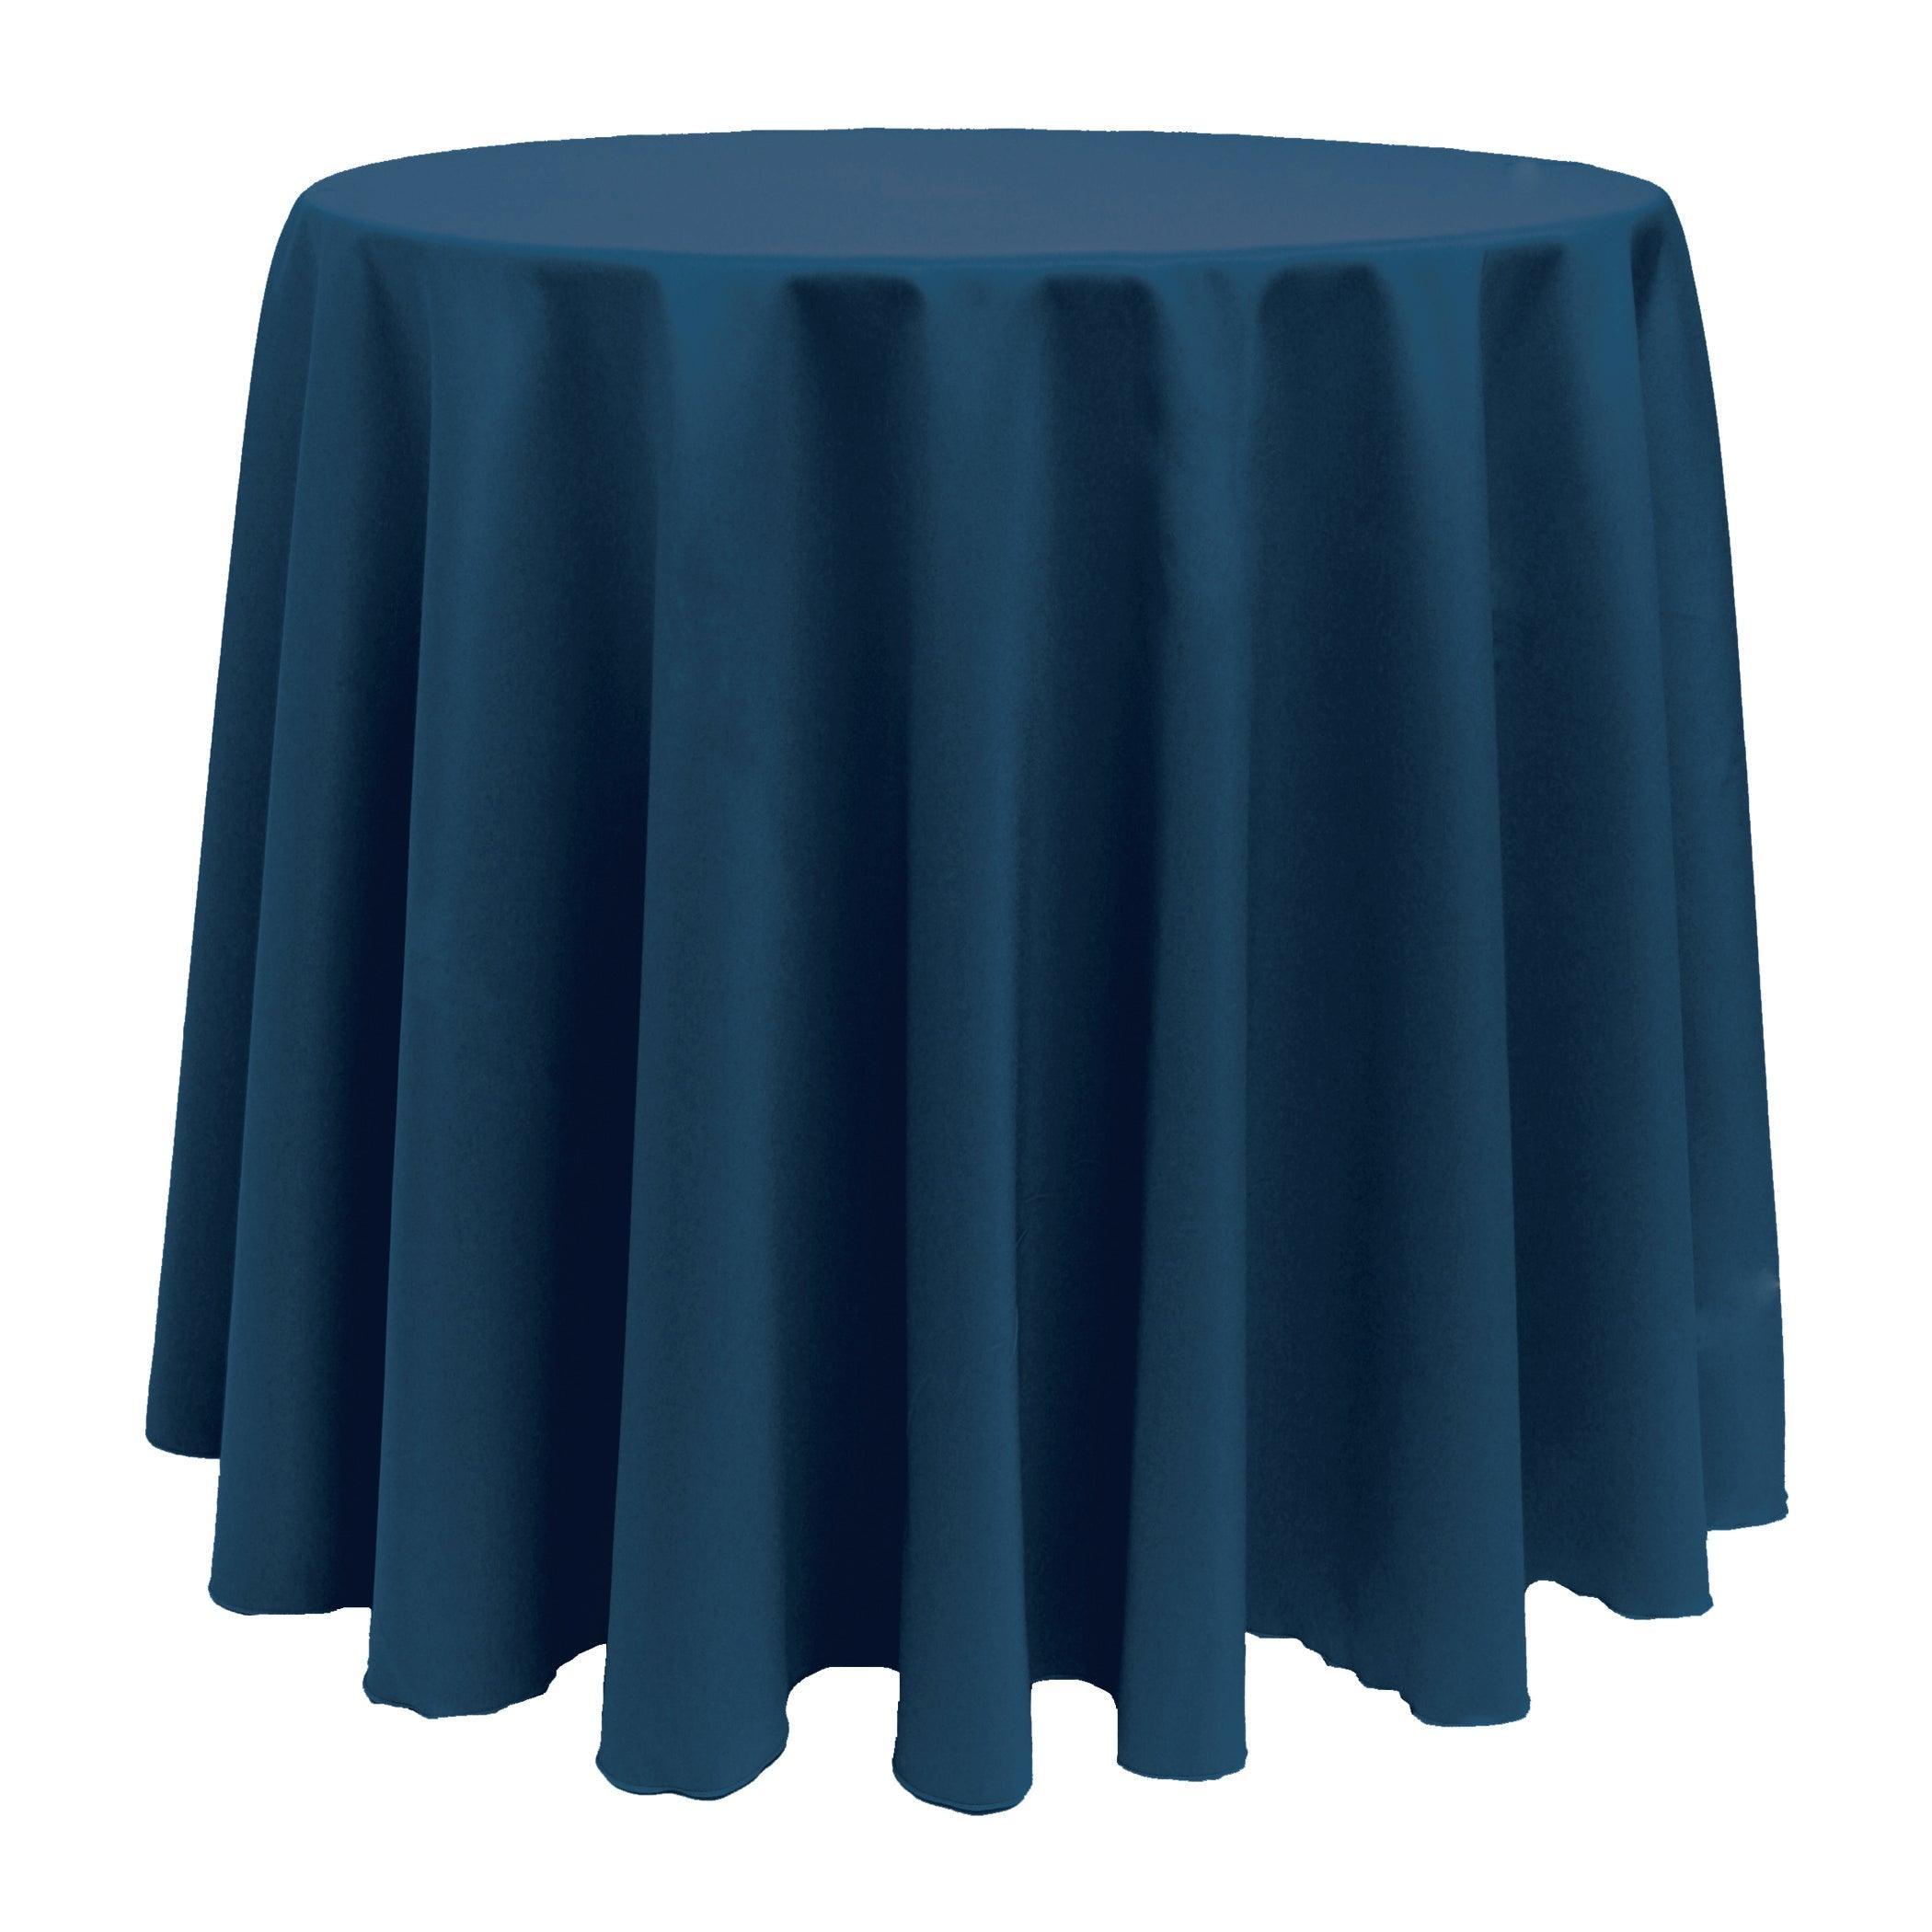 Morefeel 100% Polyester 48 Round Waterproof Tablecloth, New Unopened